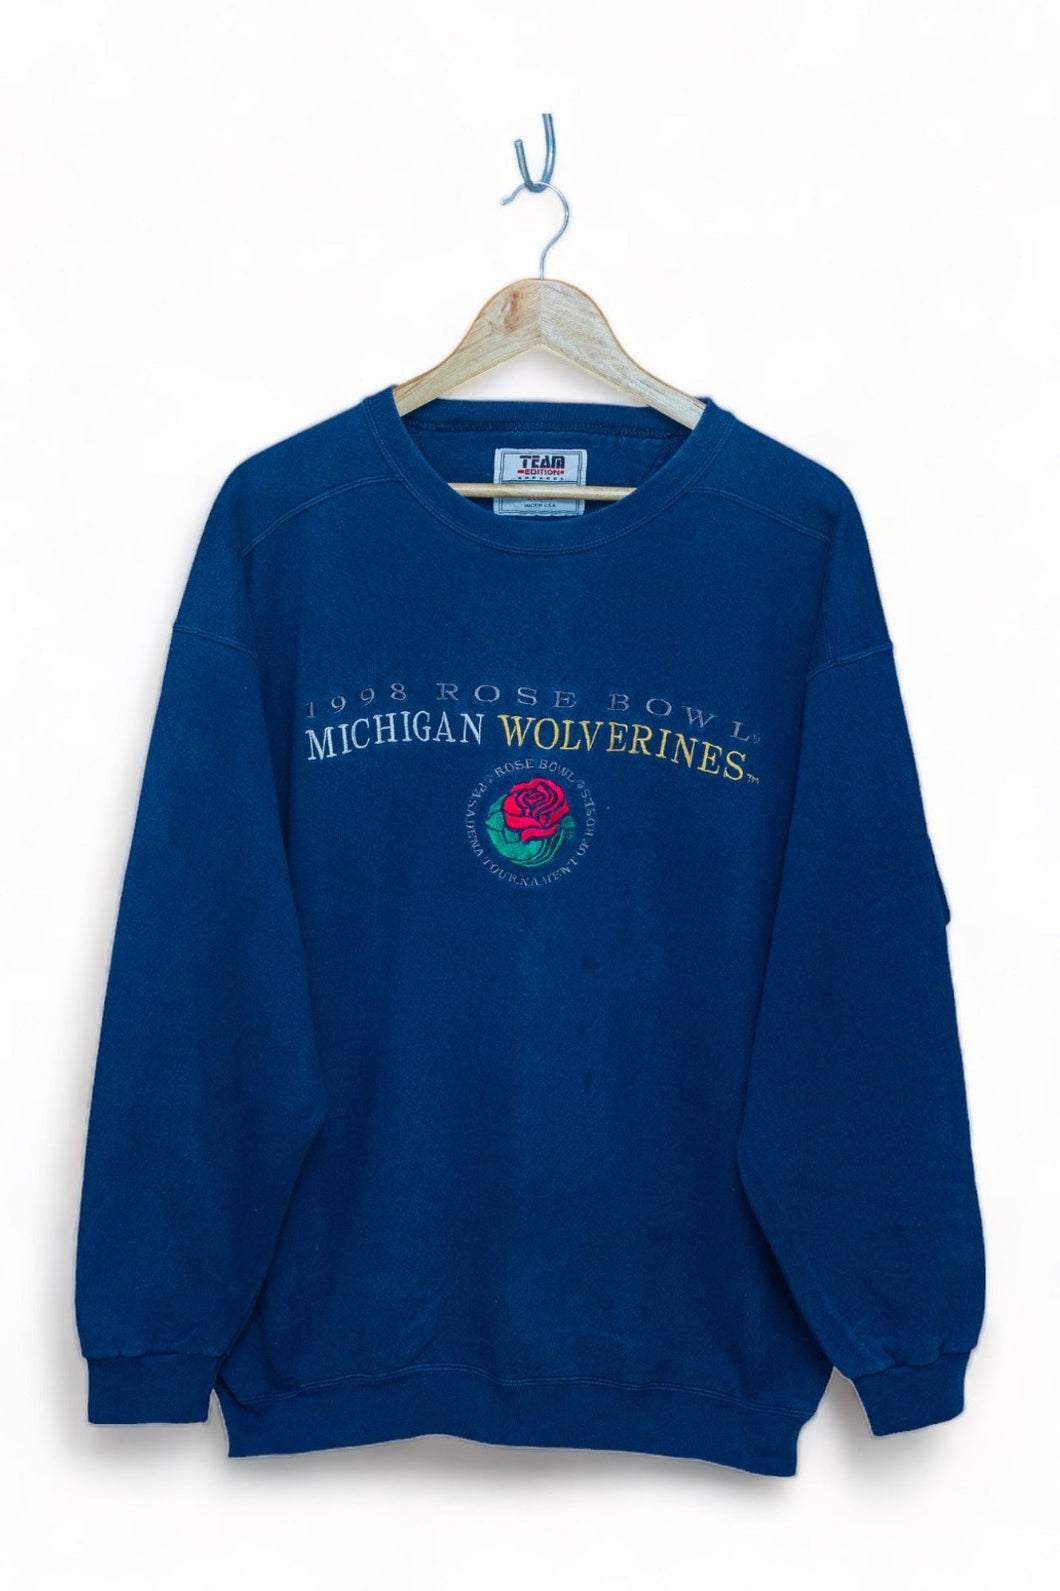 Michigan Wolverines - 1998 Rose Bowl Champions Embroidered Sweater (XL)